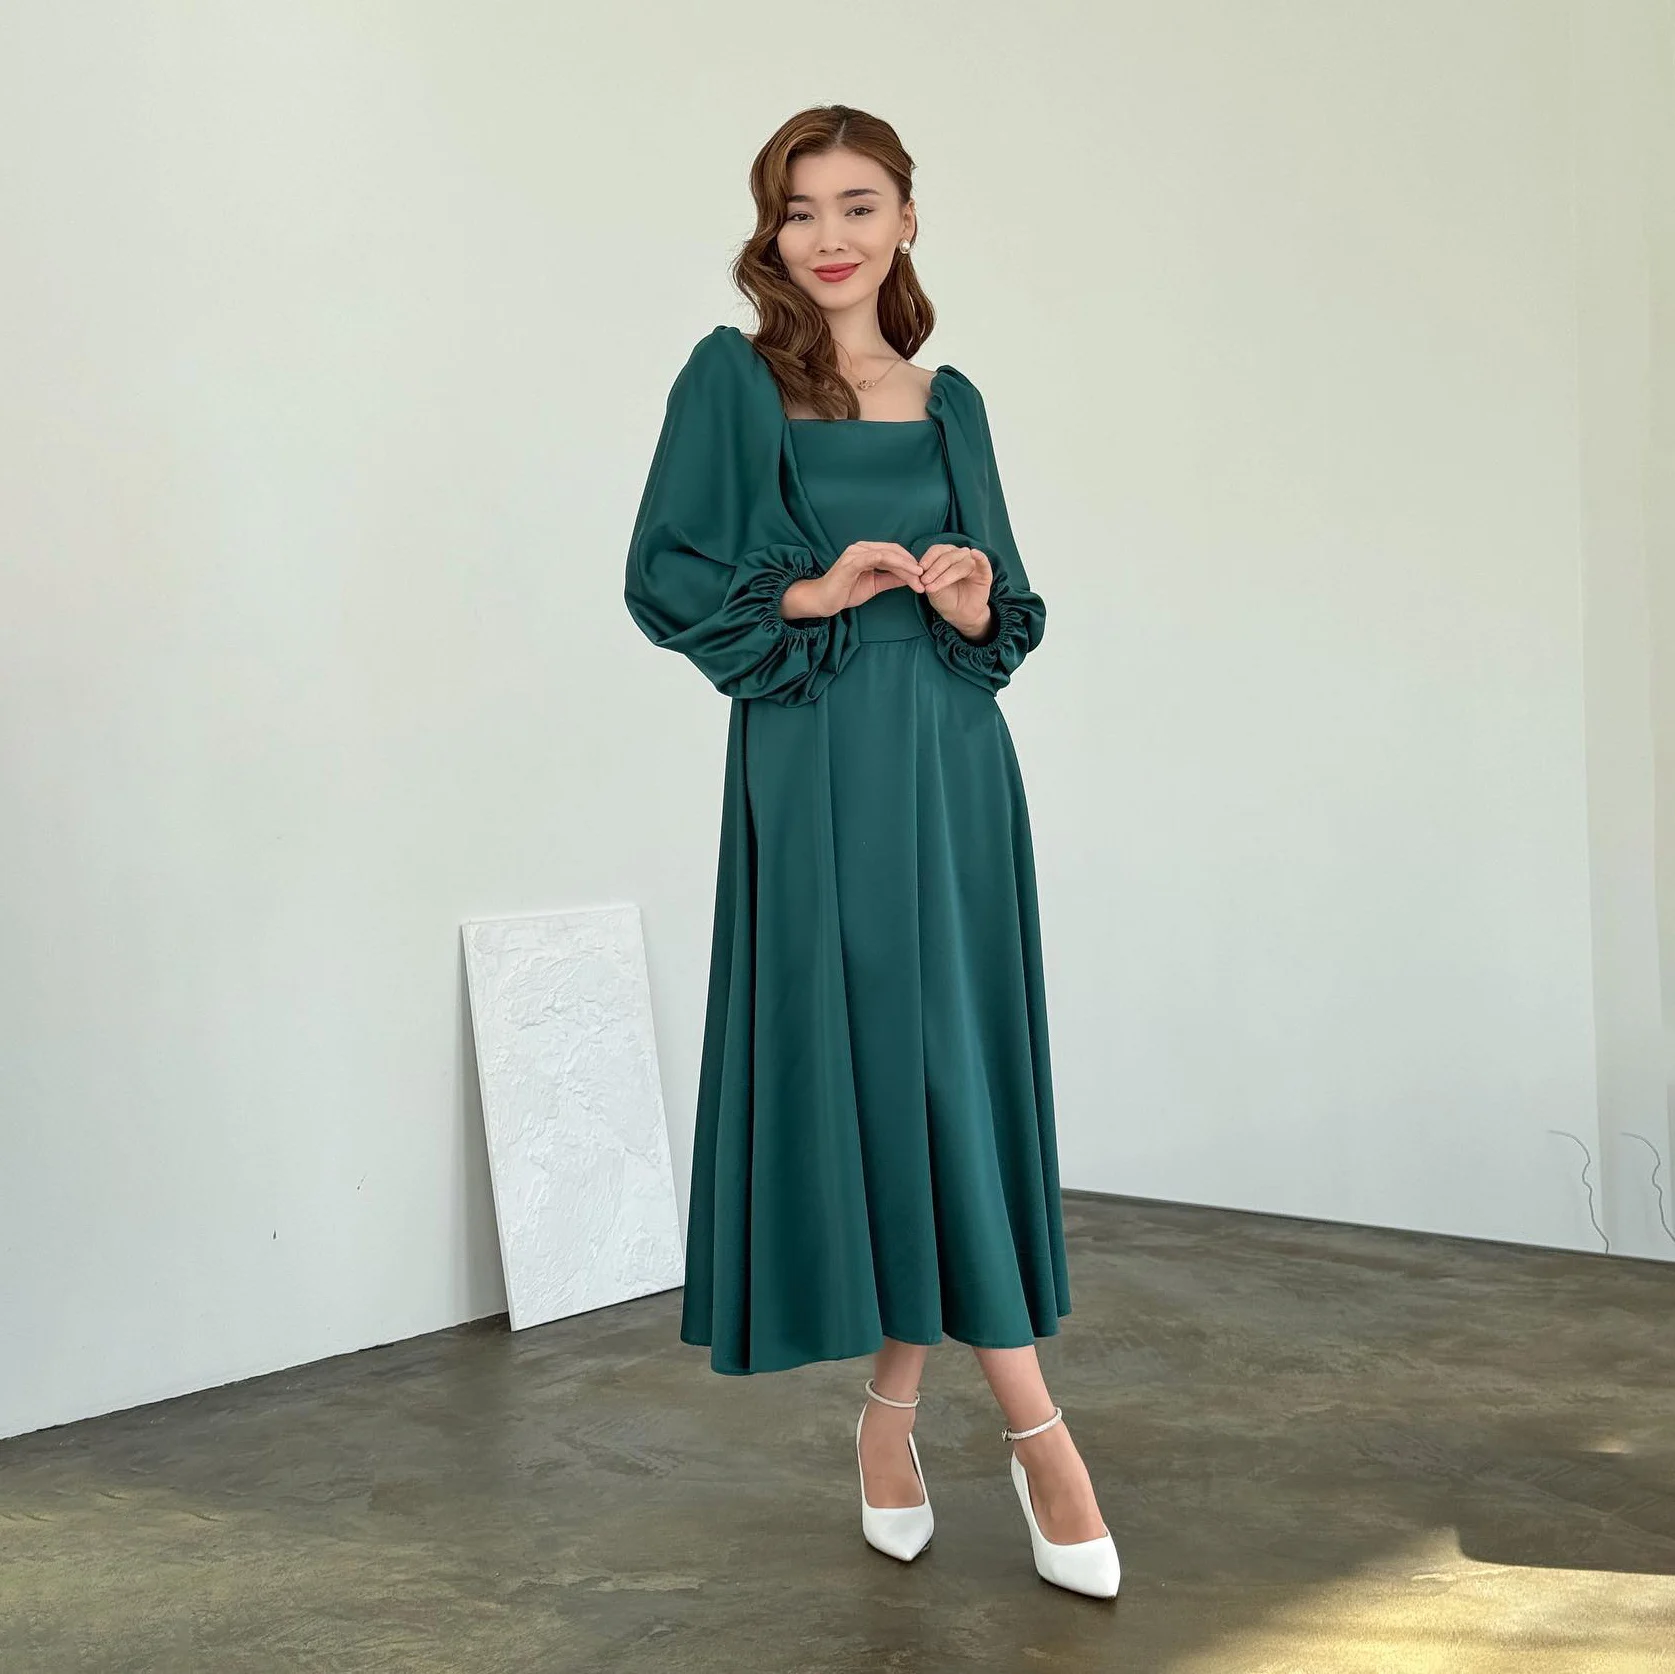 

GIOIO Square Collar Luxury Garden Evening Dresses Simple Long Sleeves Formal Birthday Ankle Length Elegant Prom Gown Party Women